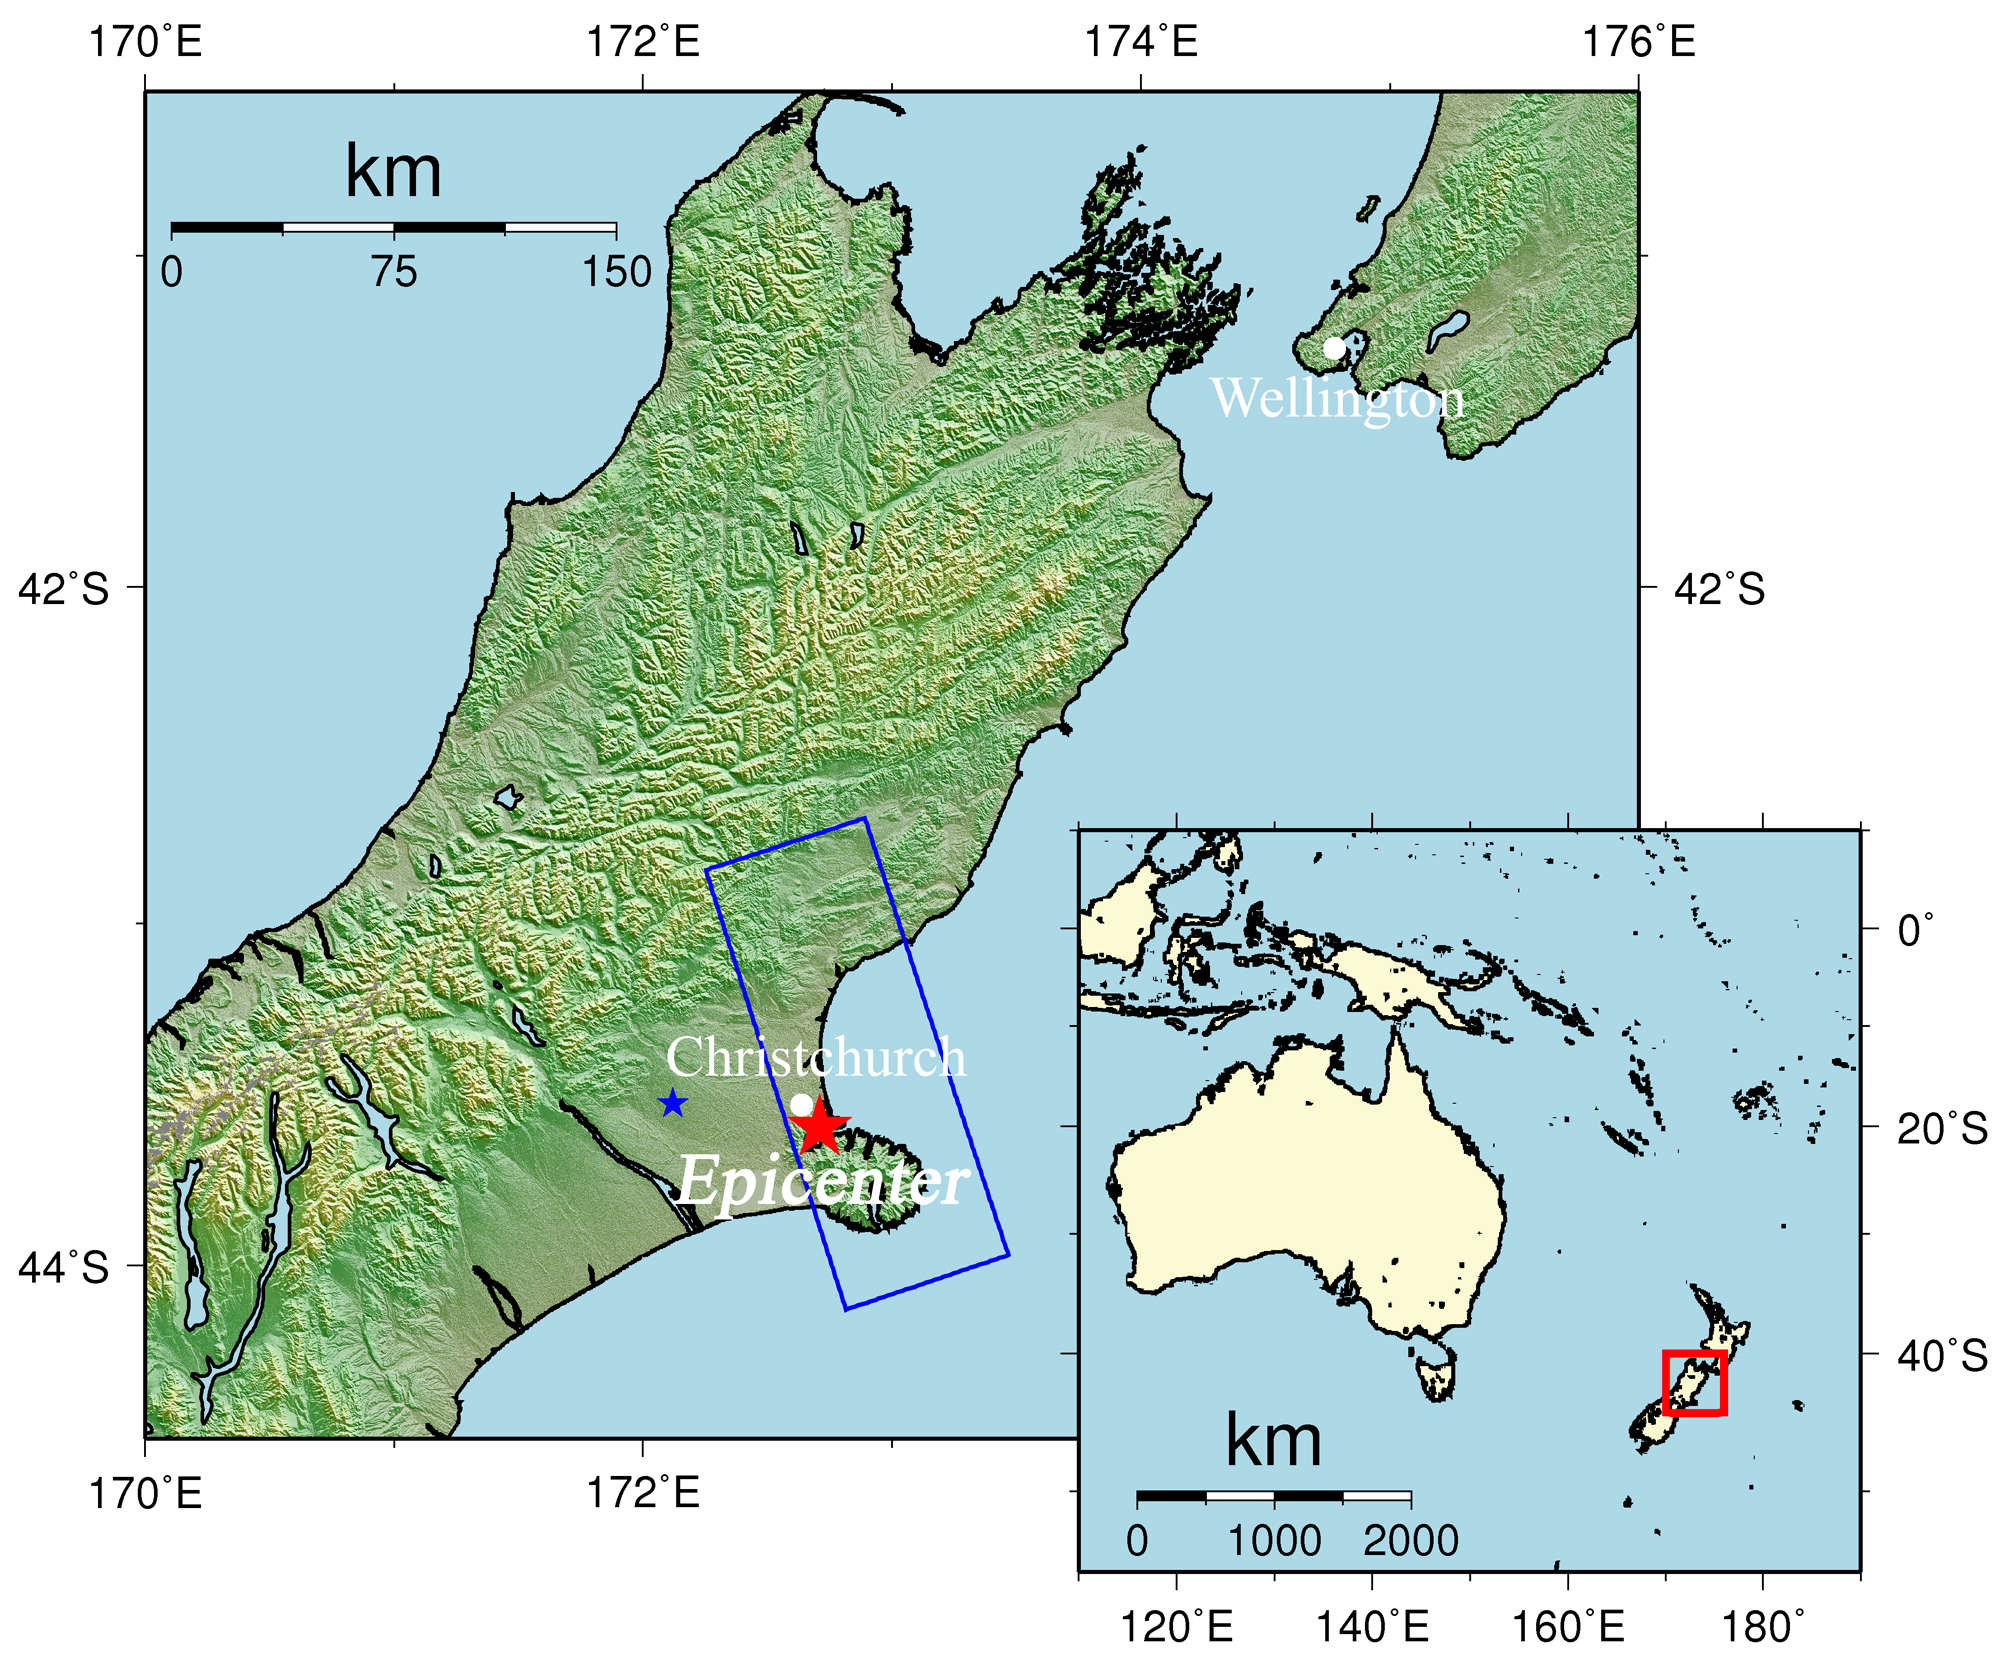 Fig. 1: An overall view of the observation area (We refer to SRTM3 as terrain data). The blue rectangle indicates the observation area shown in Fig. 2. The red star represents the epicenter of this earthquake, and the blue star represents the epicenter of the previous earthquake on September 4, 2010.